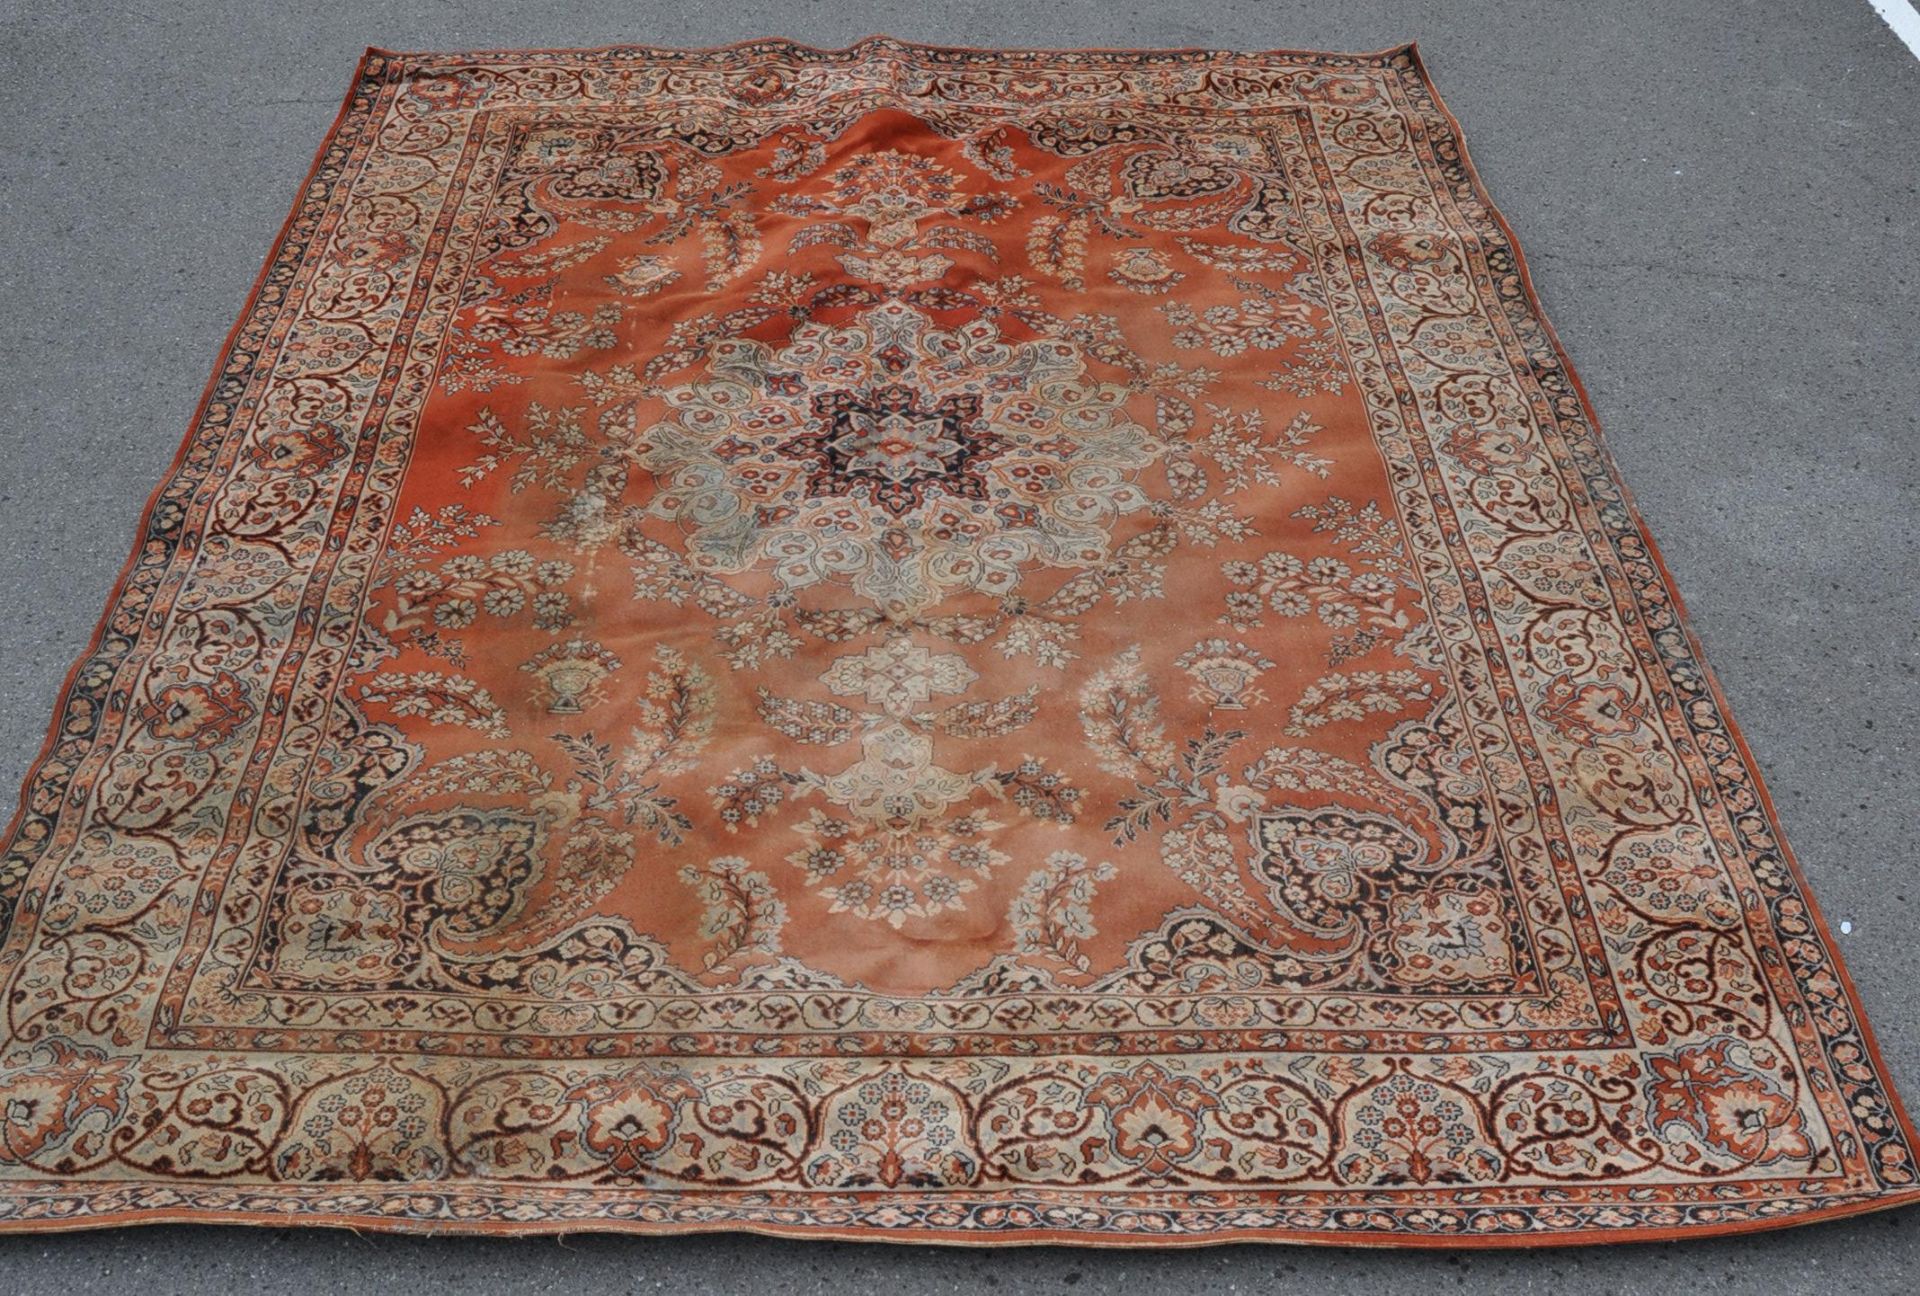 A large 20th century Persian / Islamic inspired woollen rug. The large floor carpet run with red